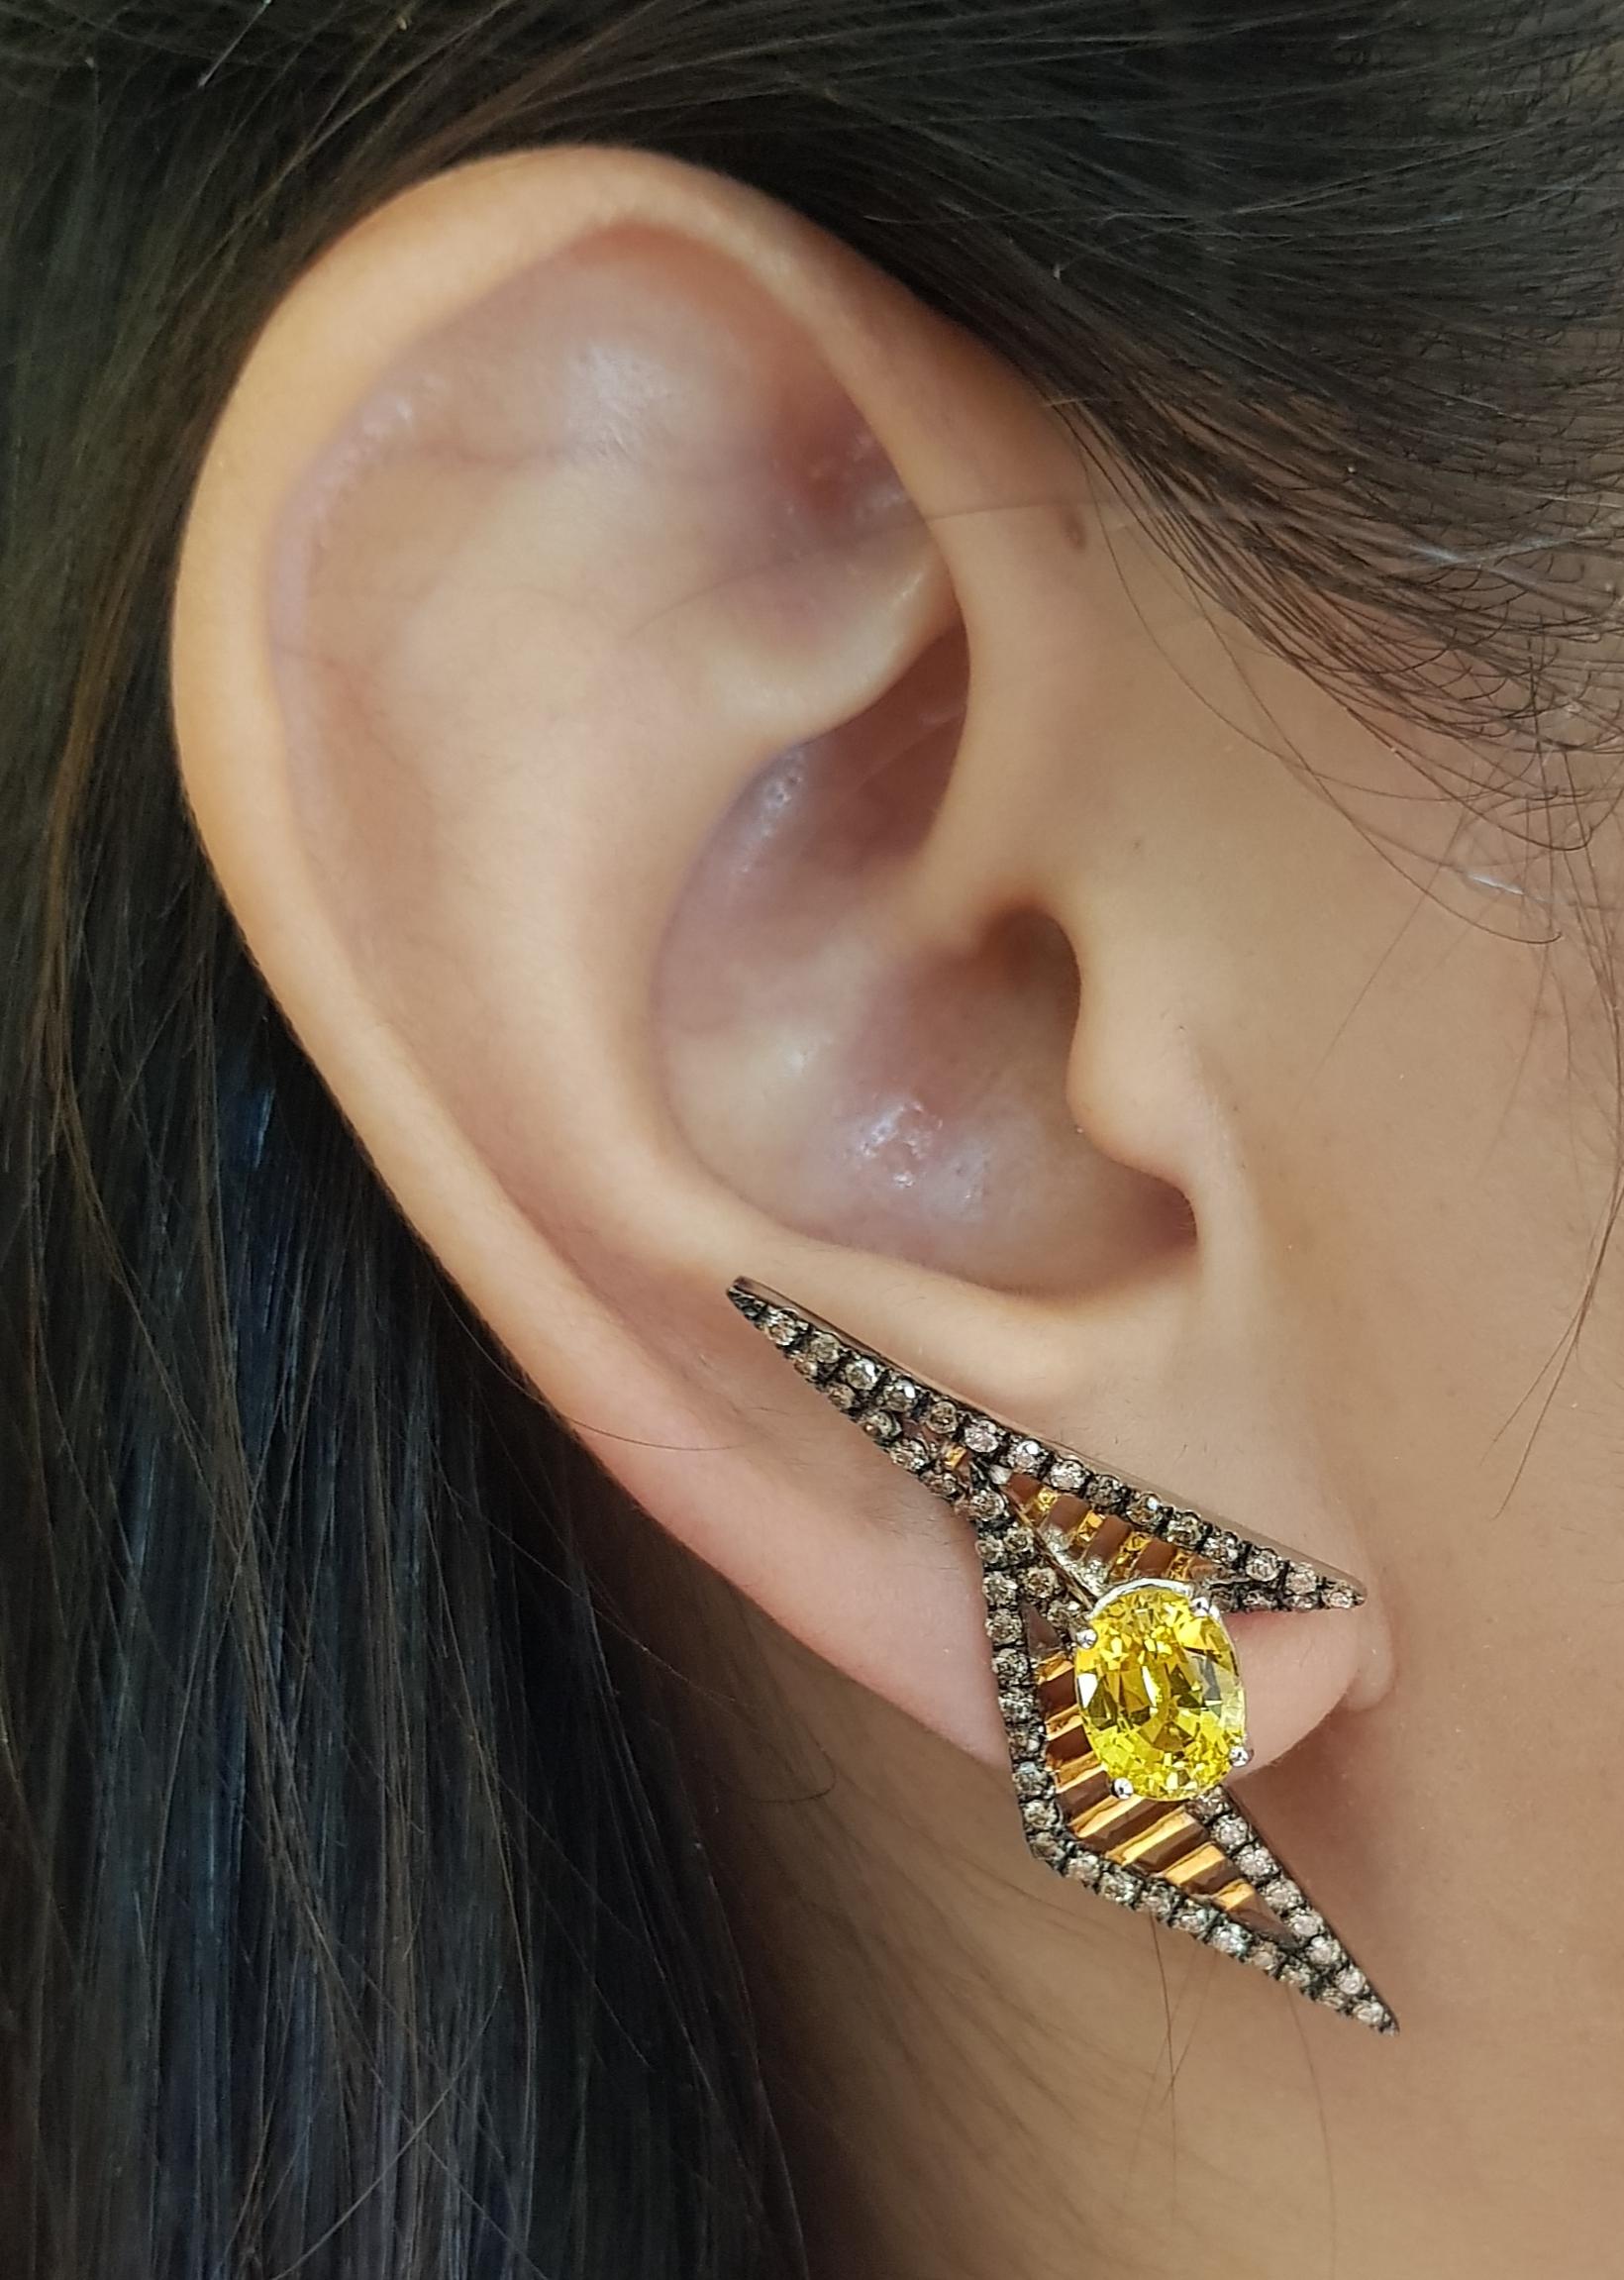 Yellow Sapphire 4.0 carats with Brown Diamond 1.22 carats Earrings set in 18 Karat Gold Settings

Width:  1.8 cm 
Length:  4.0 cm
Total Weight: 11.1 grams

The ancient Japanese tradition of paper folding has inspired the form and elements of this